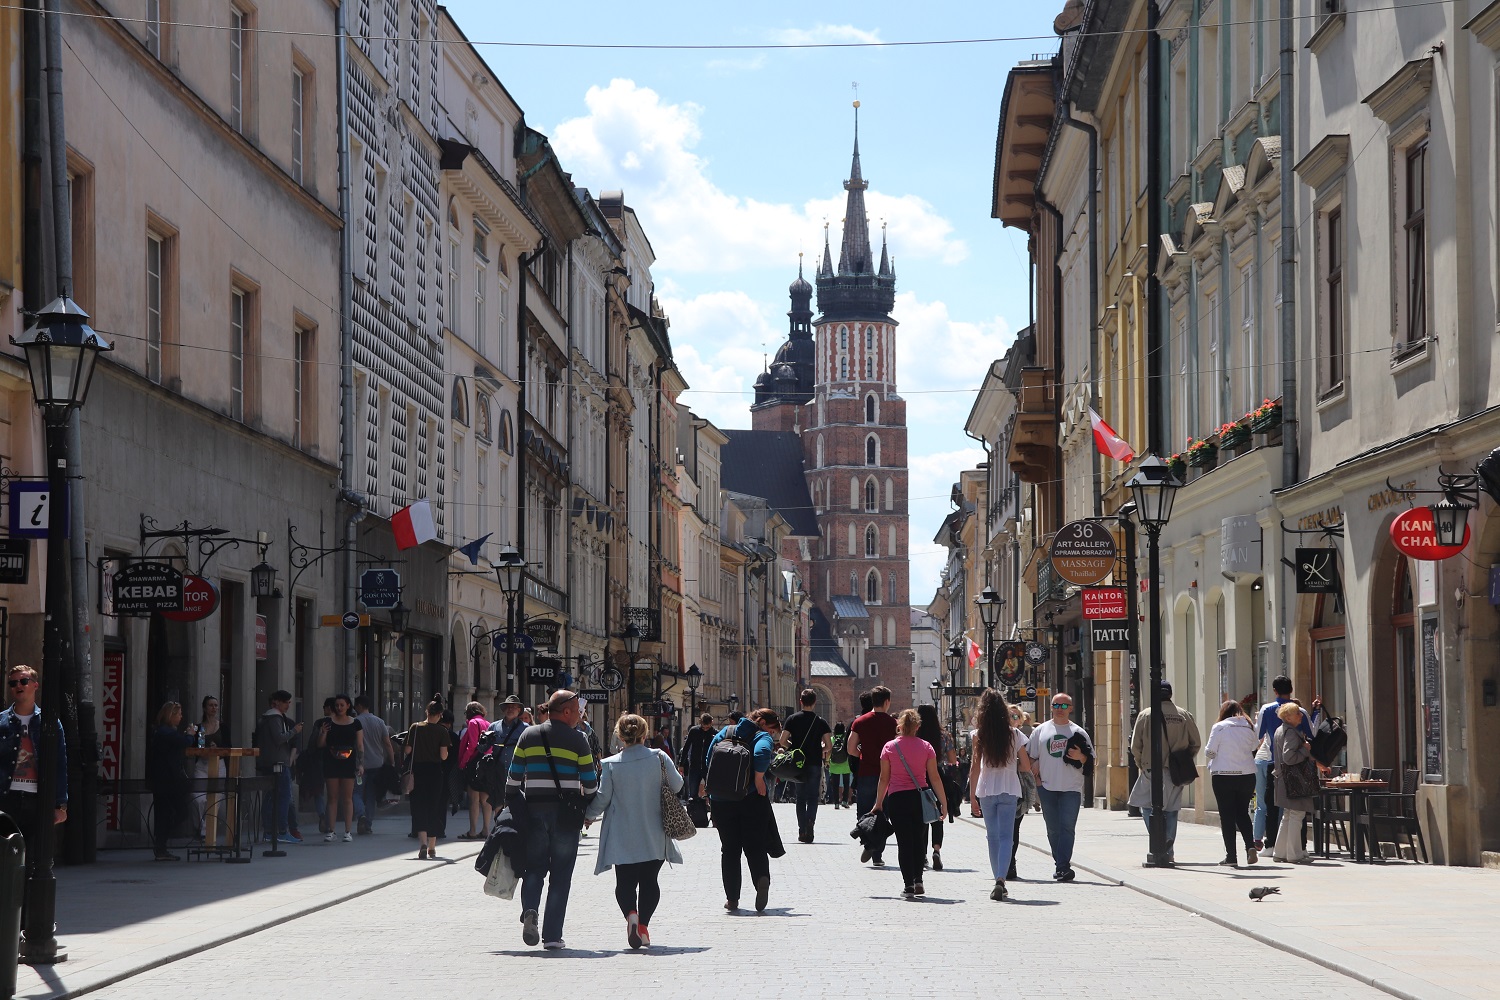 Things to Do in Krakow, Poland